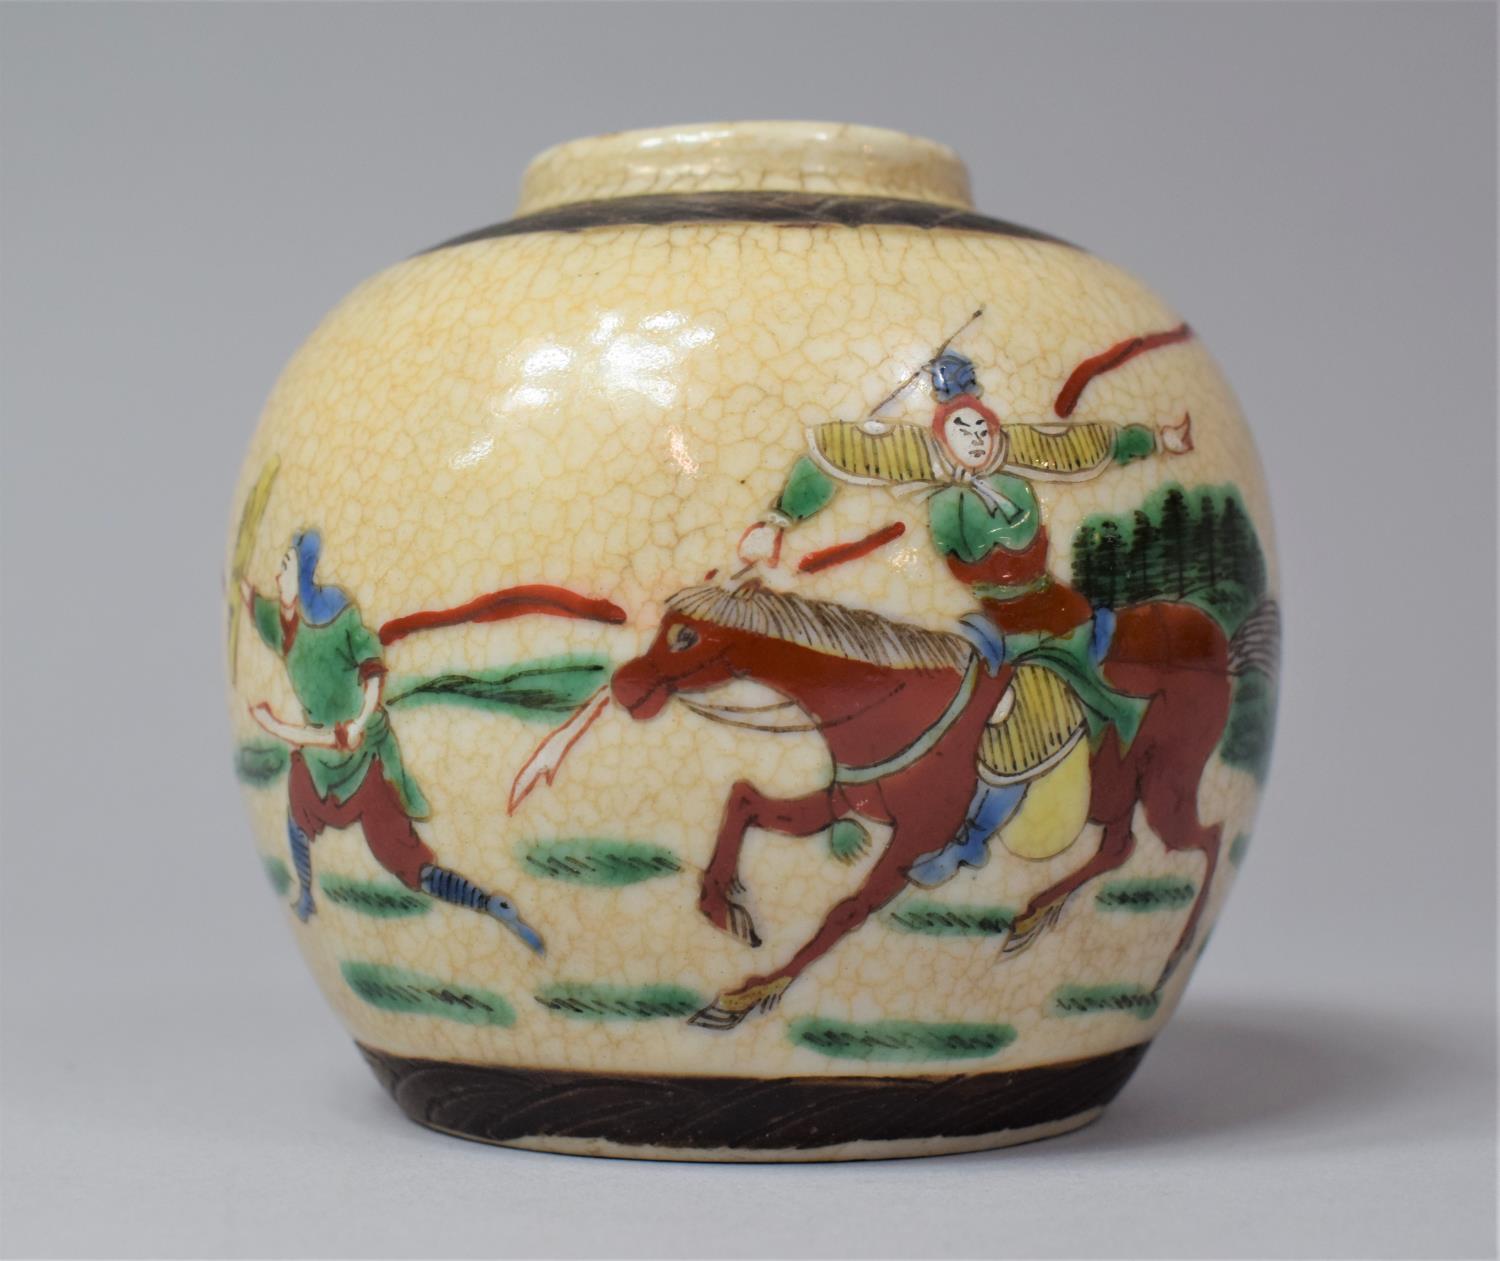 A Small Chinese Nanking Ginger Jar Decorated in Polychrome Enamels Depicting Battle Scenes, 10cm - Image 5 of 7